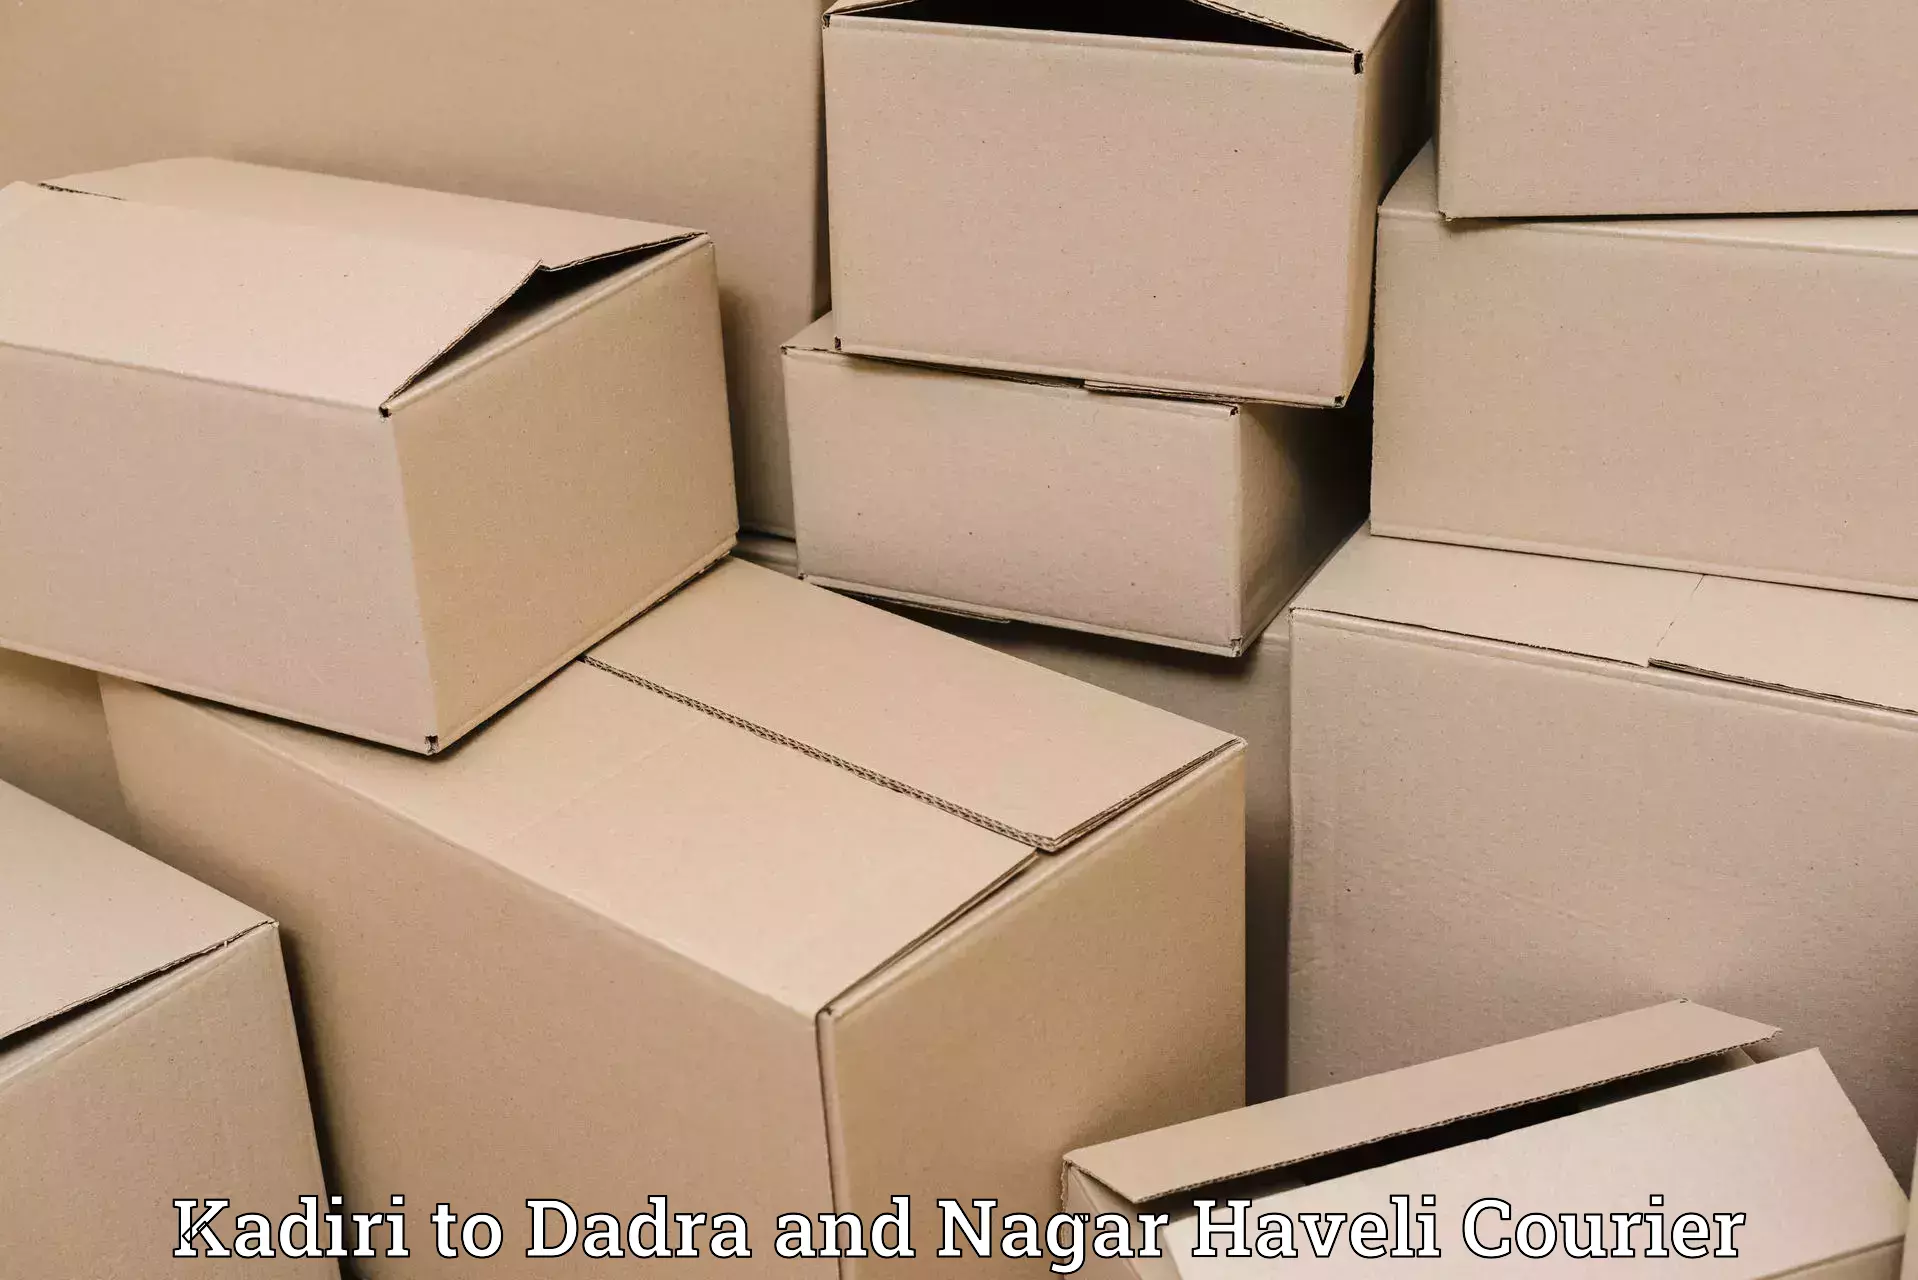 High-quality delivery services in Kadiri to Dadra and Nagar Haveli